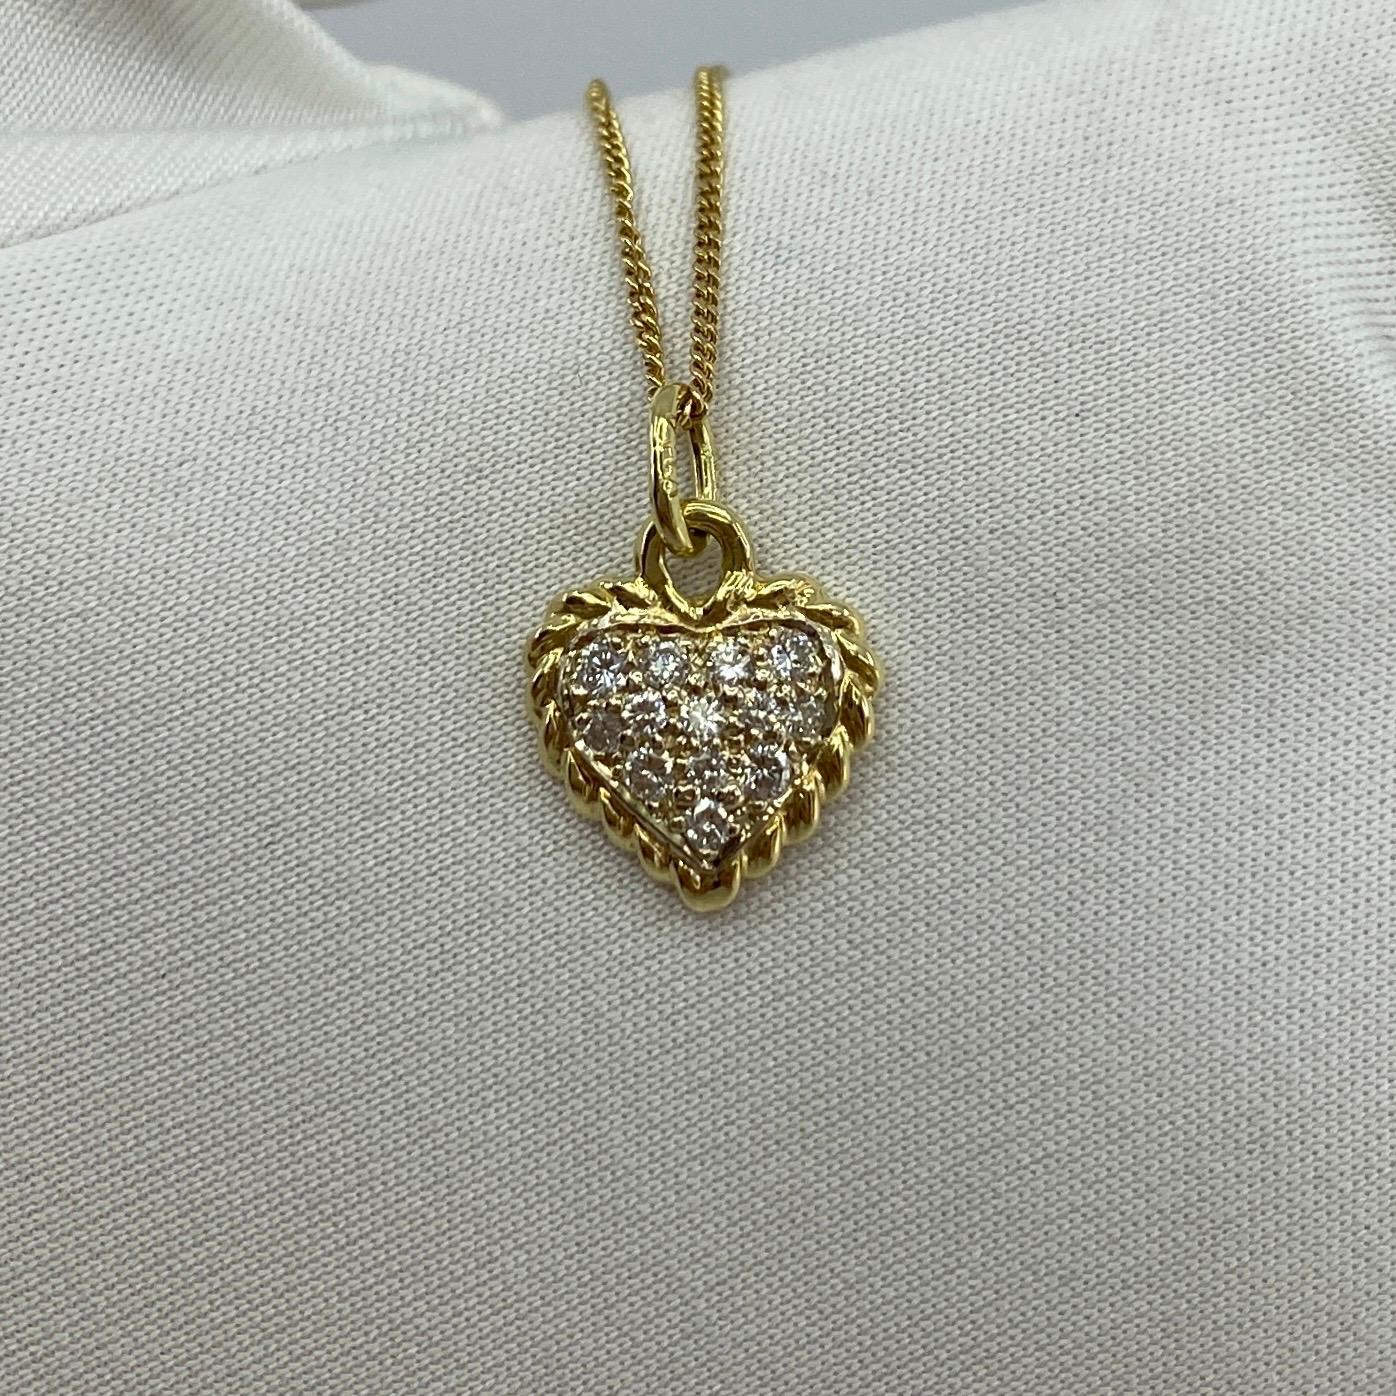 Vintage Van Cleef & Arpels Alhambra Diamond 18k Gold Heart Pendant.

A classic pave diamond set heart pendant on a fine 18kt yellow gold chain necklace by Van Cleef & Arpels. The heart is set with 13 brilliant round cut diamonds and measures approx.